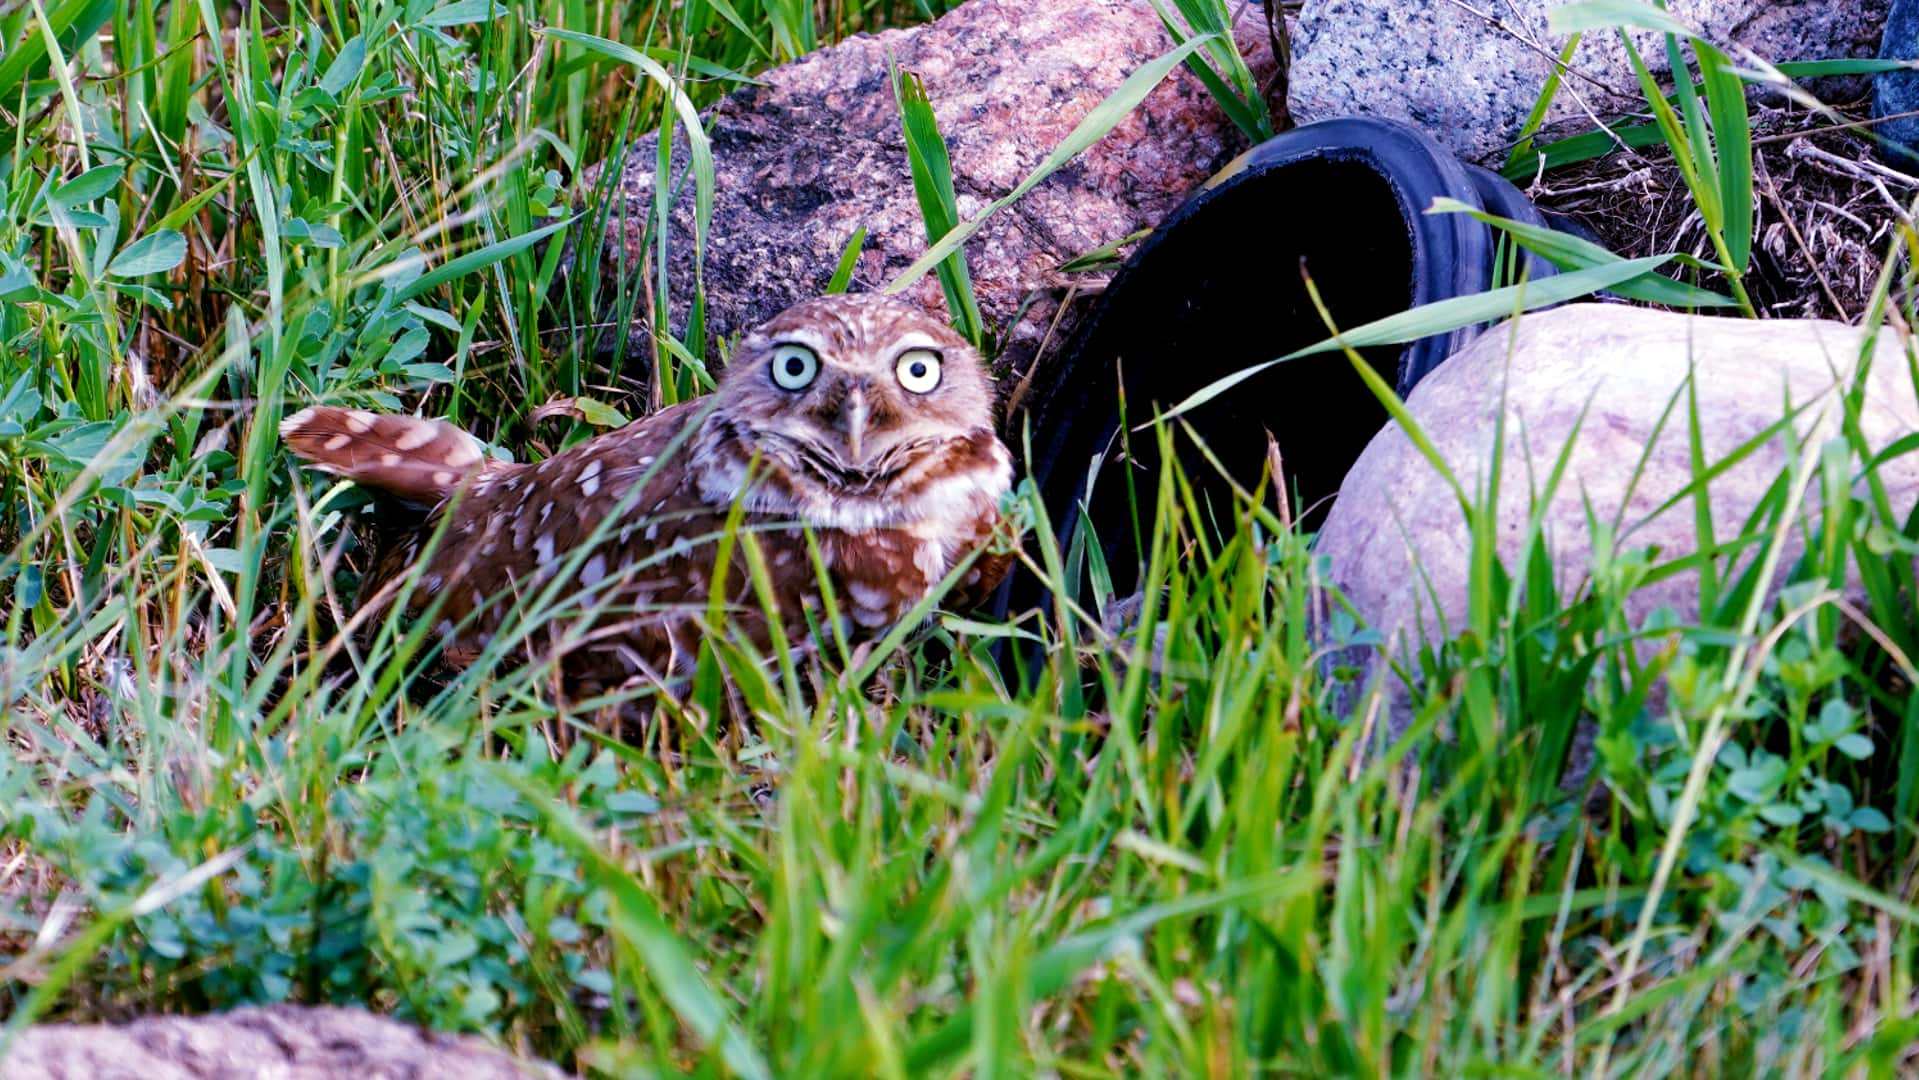 banding baby burrowing owls the best day of the year though fate of endangered species uncertain 7